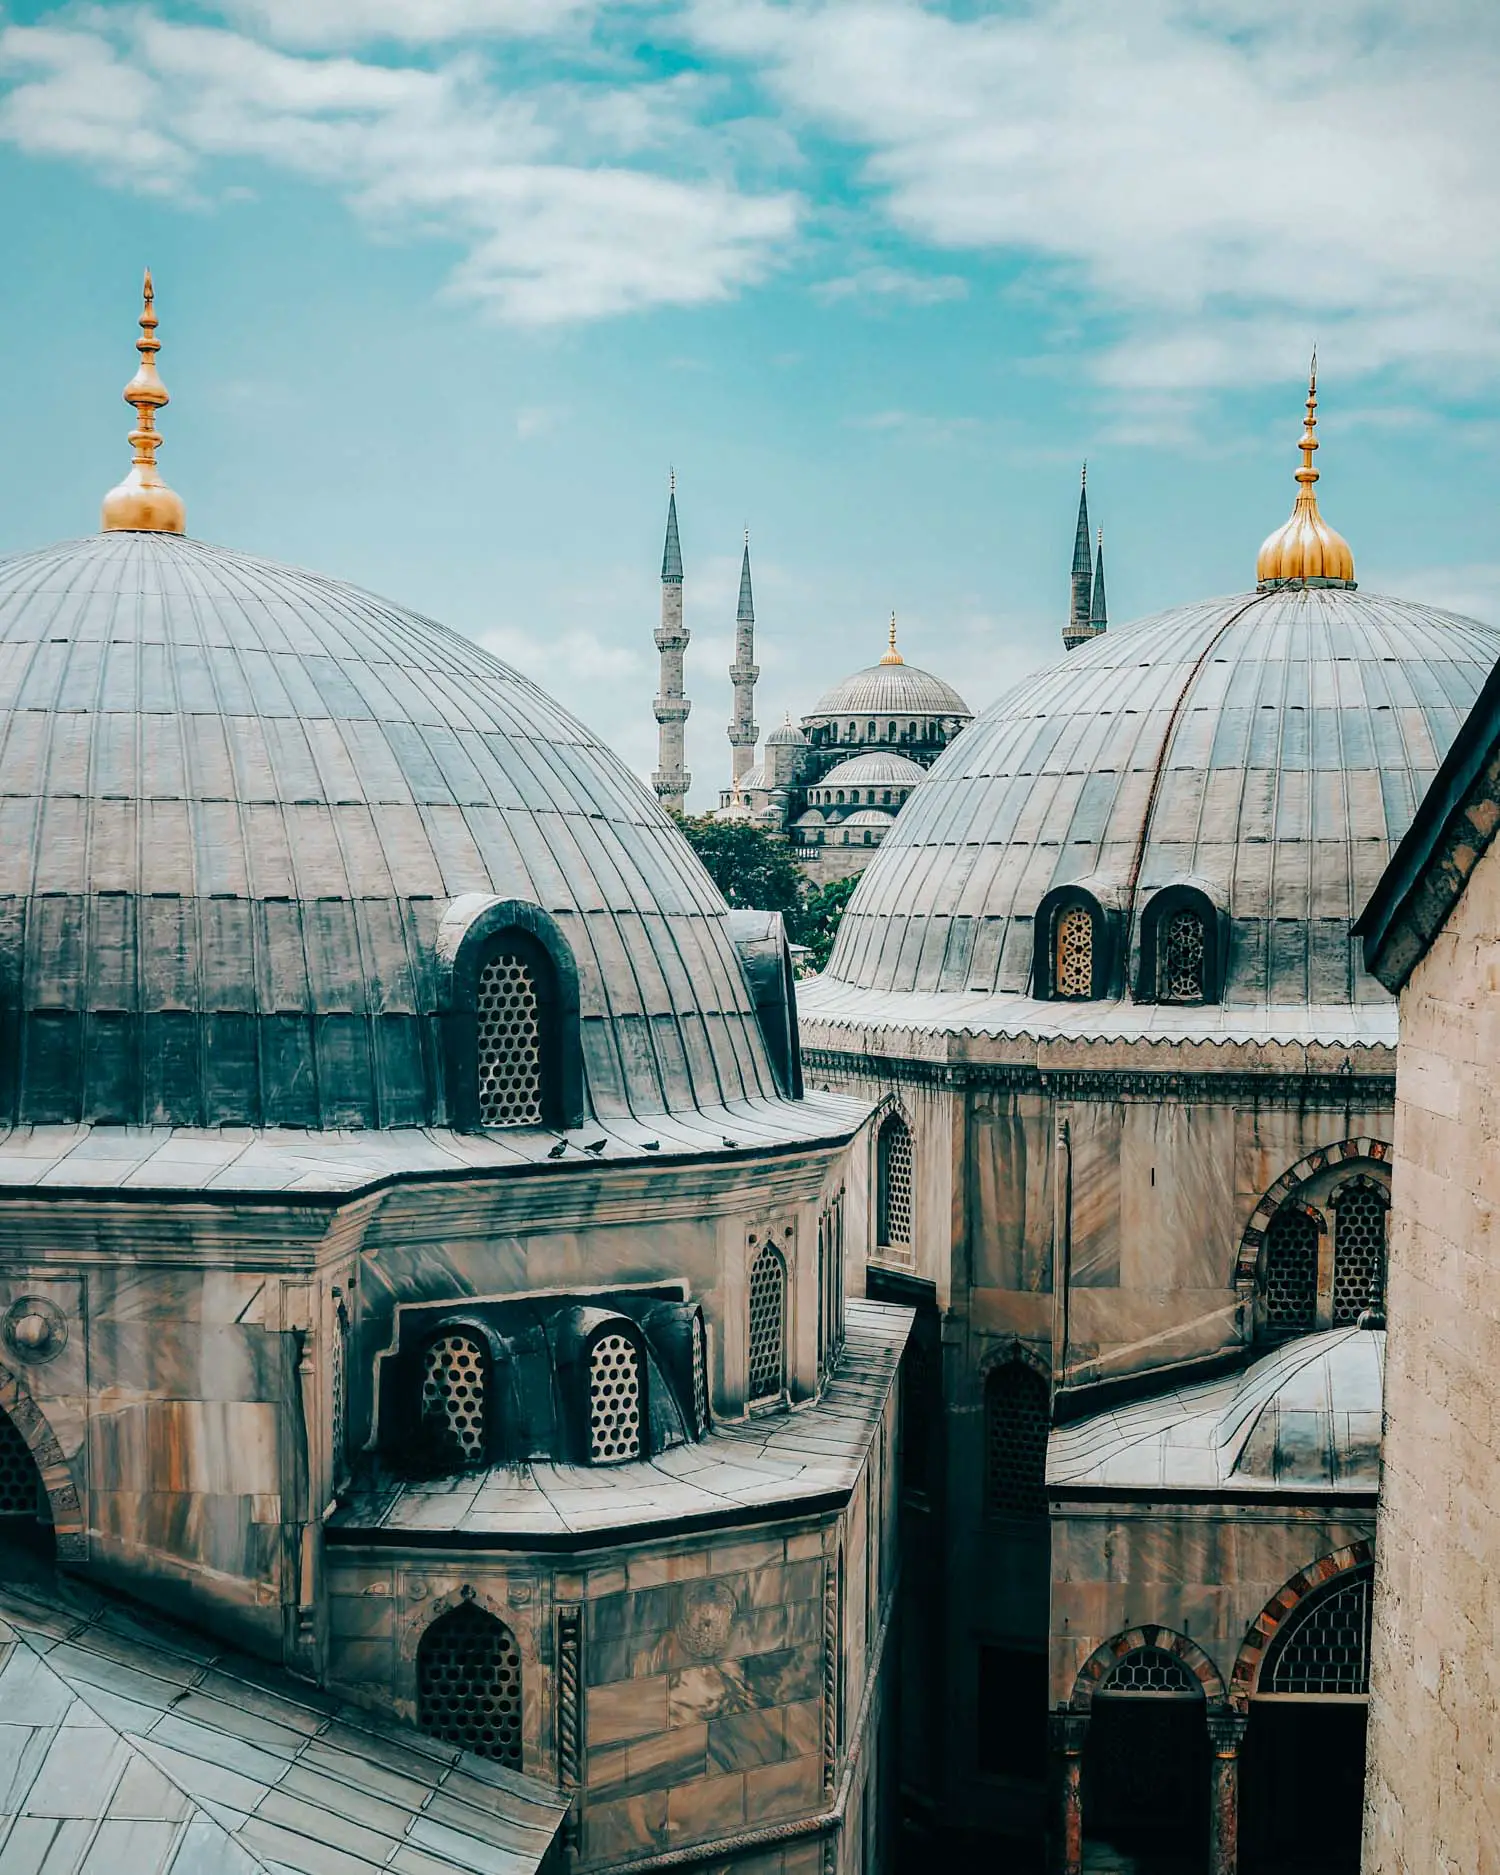 blue mosque in istanbul,turkey